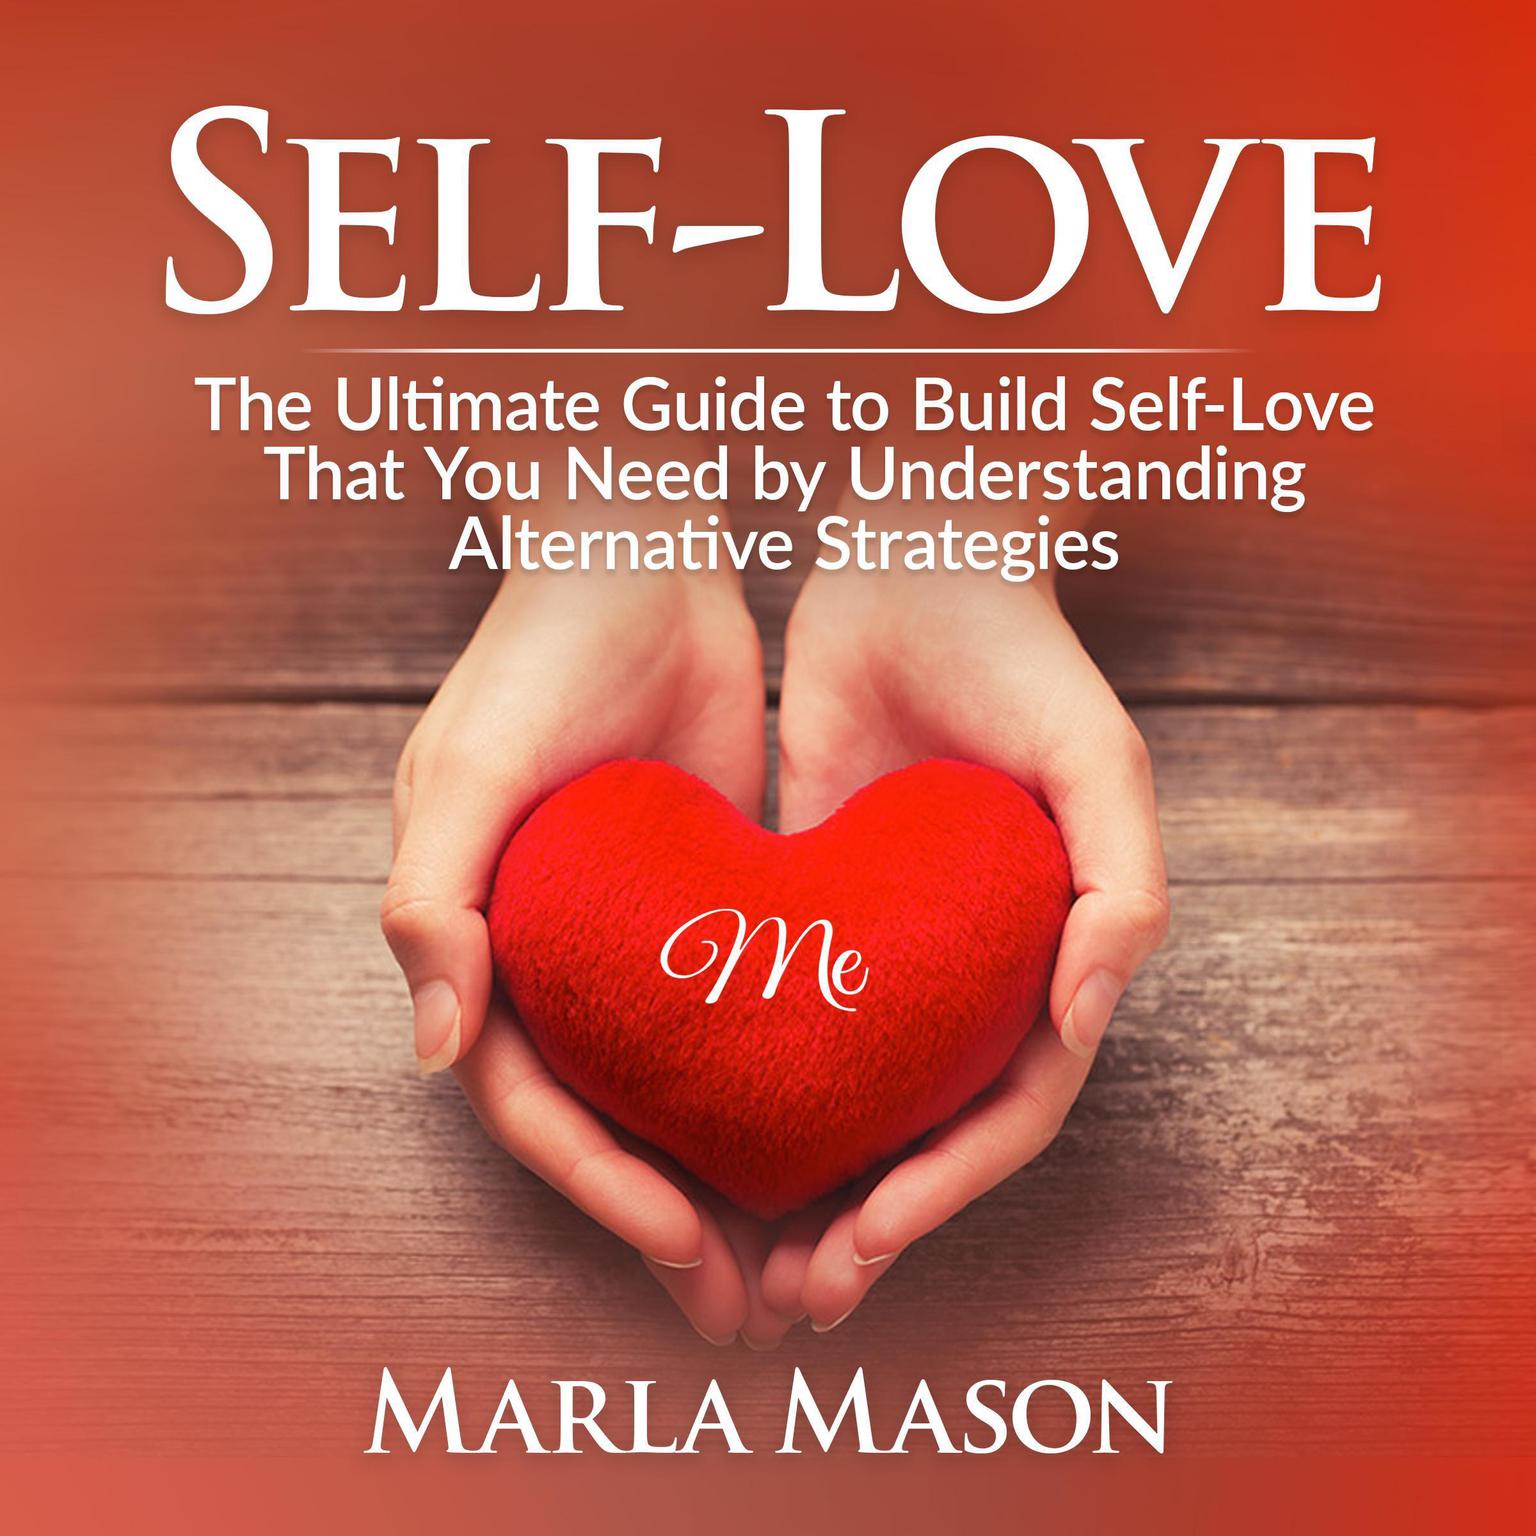 Self-Love: The Ultimate Guide to Build Self-Love That You Need by Understanding Alternative Strategies Audiobook, by Marla Mason